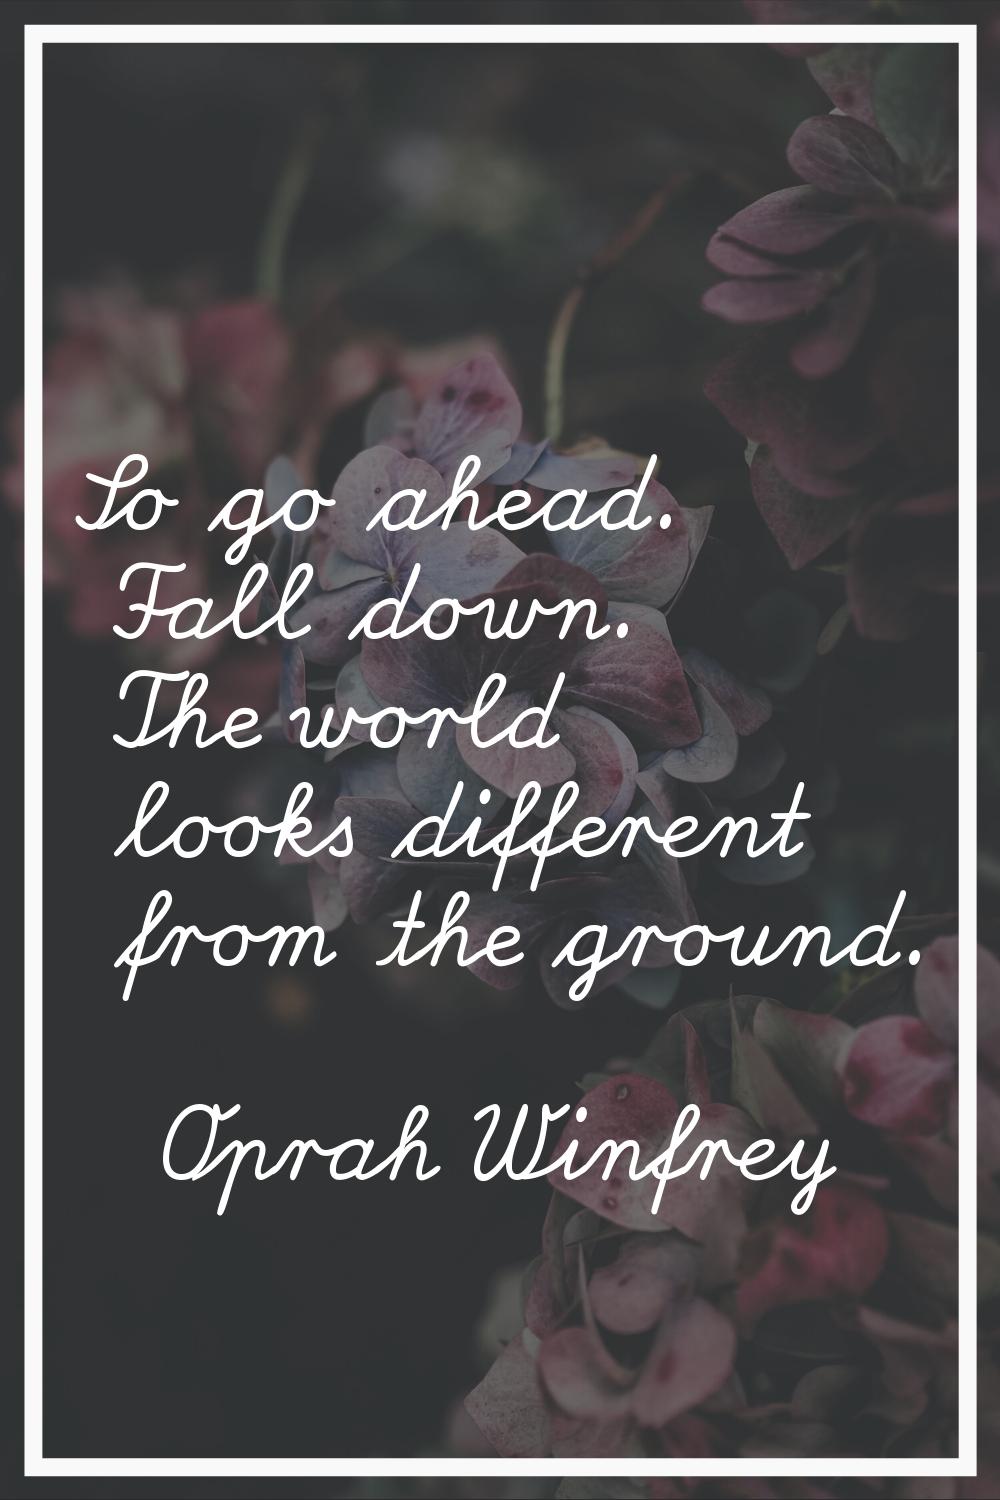 So go ahead. Fall down. The world looks different from the ground.